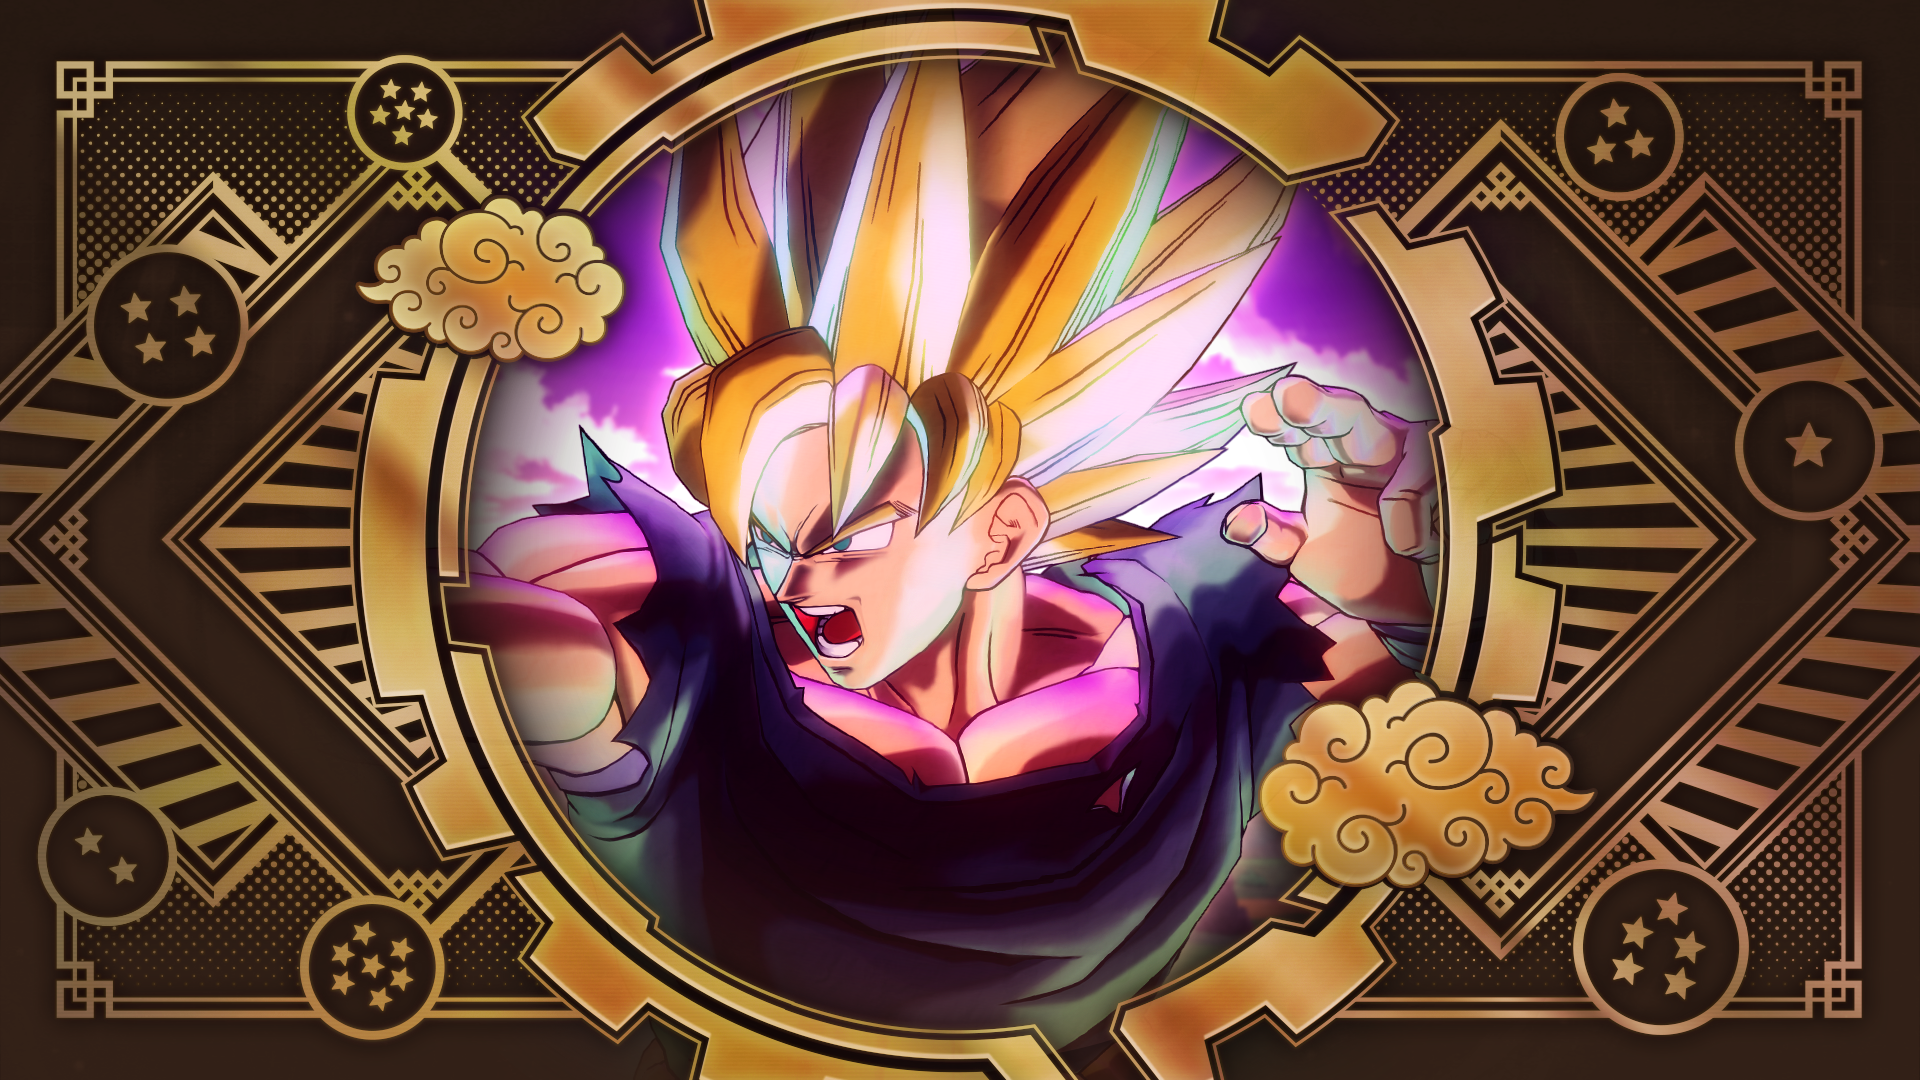 Icon for I Summon You Forth: Shenron!